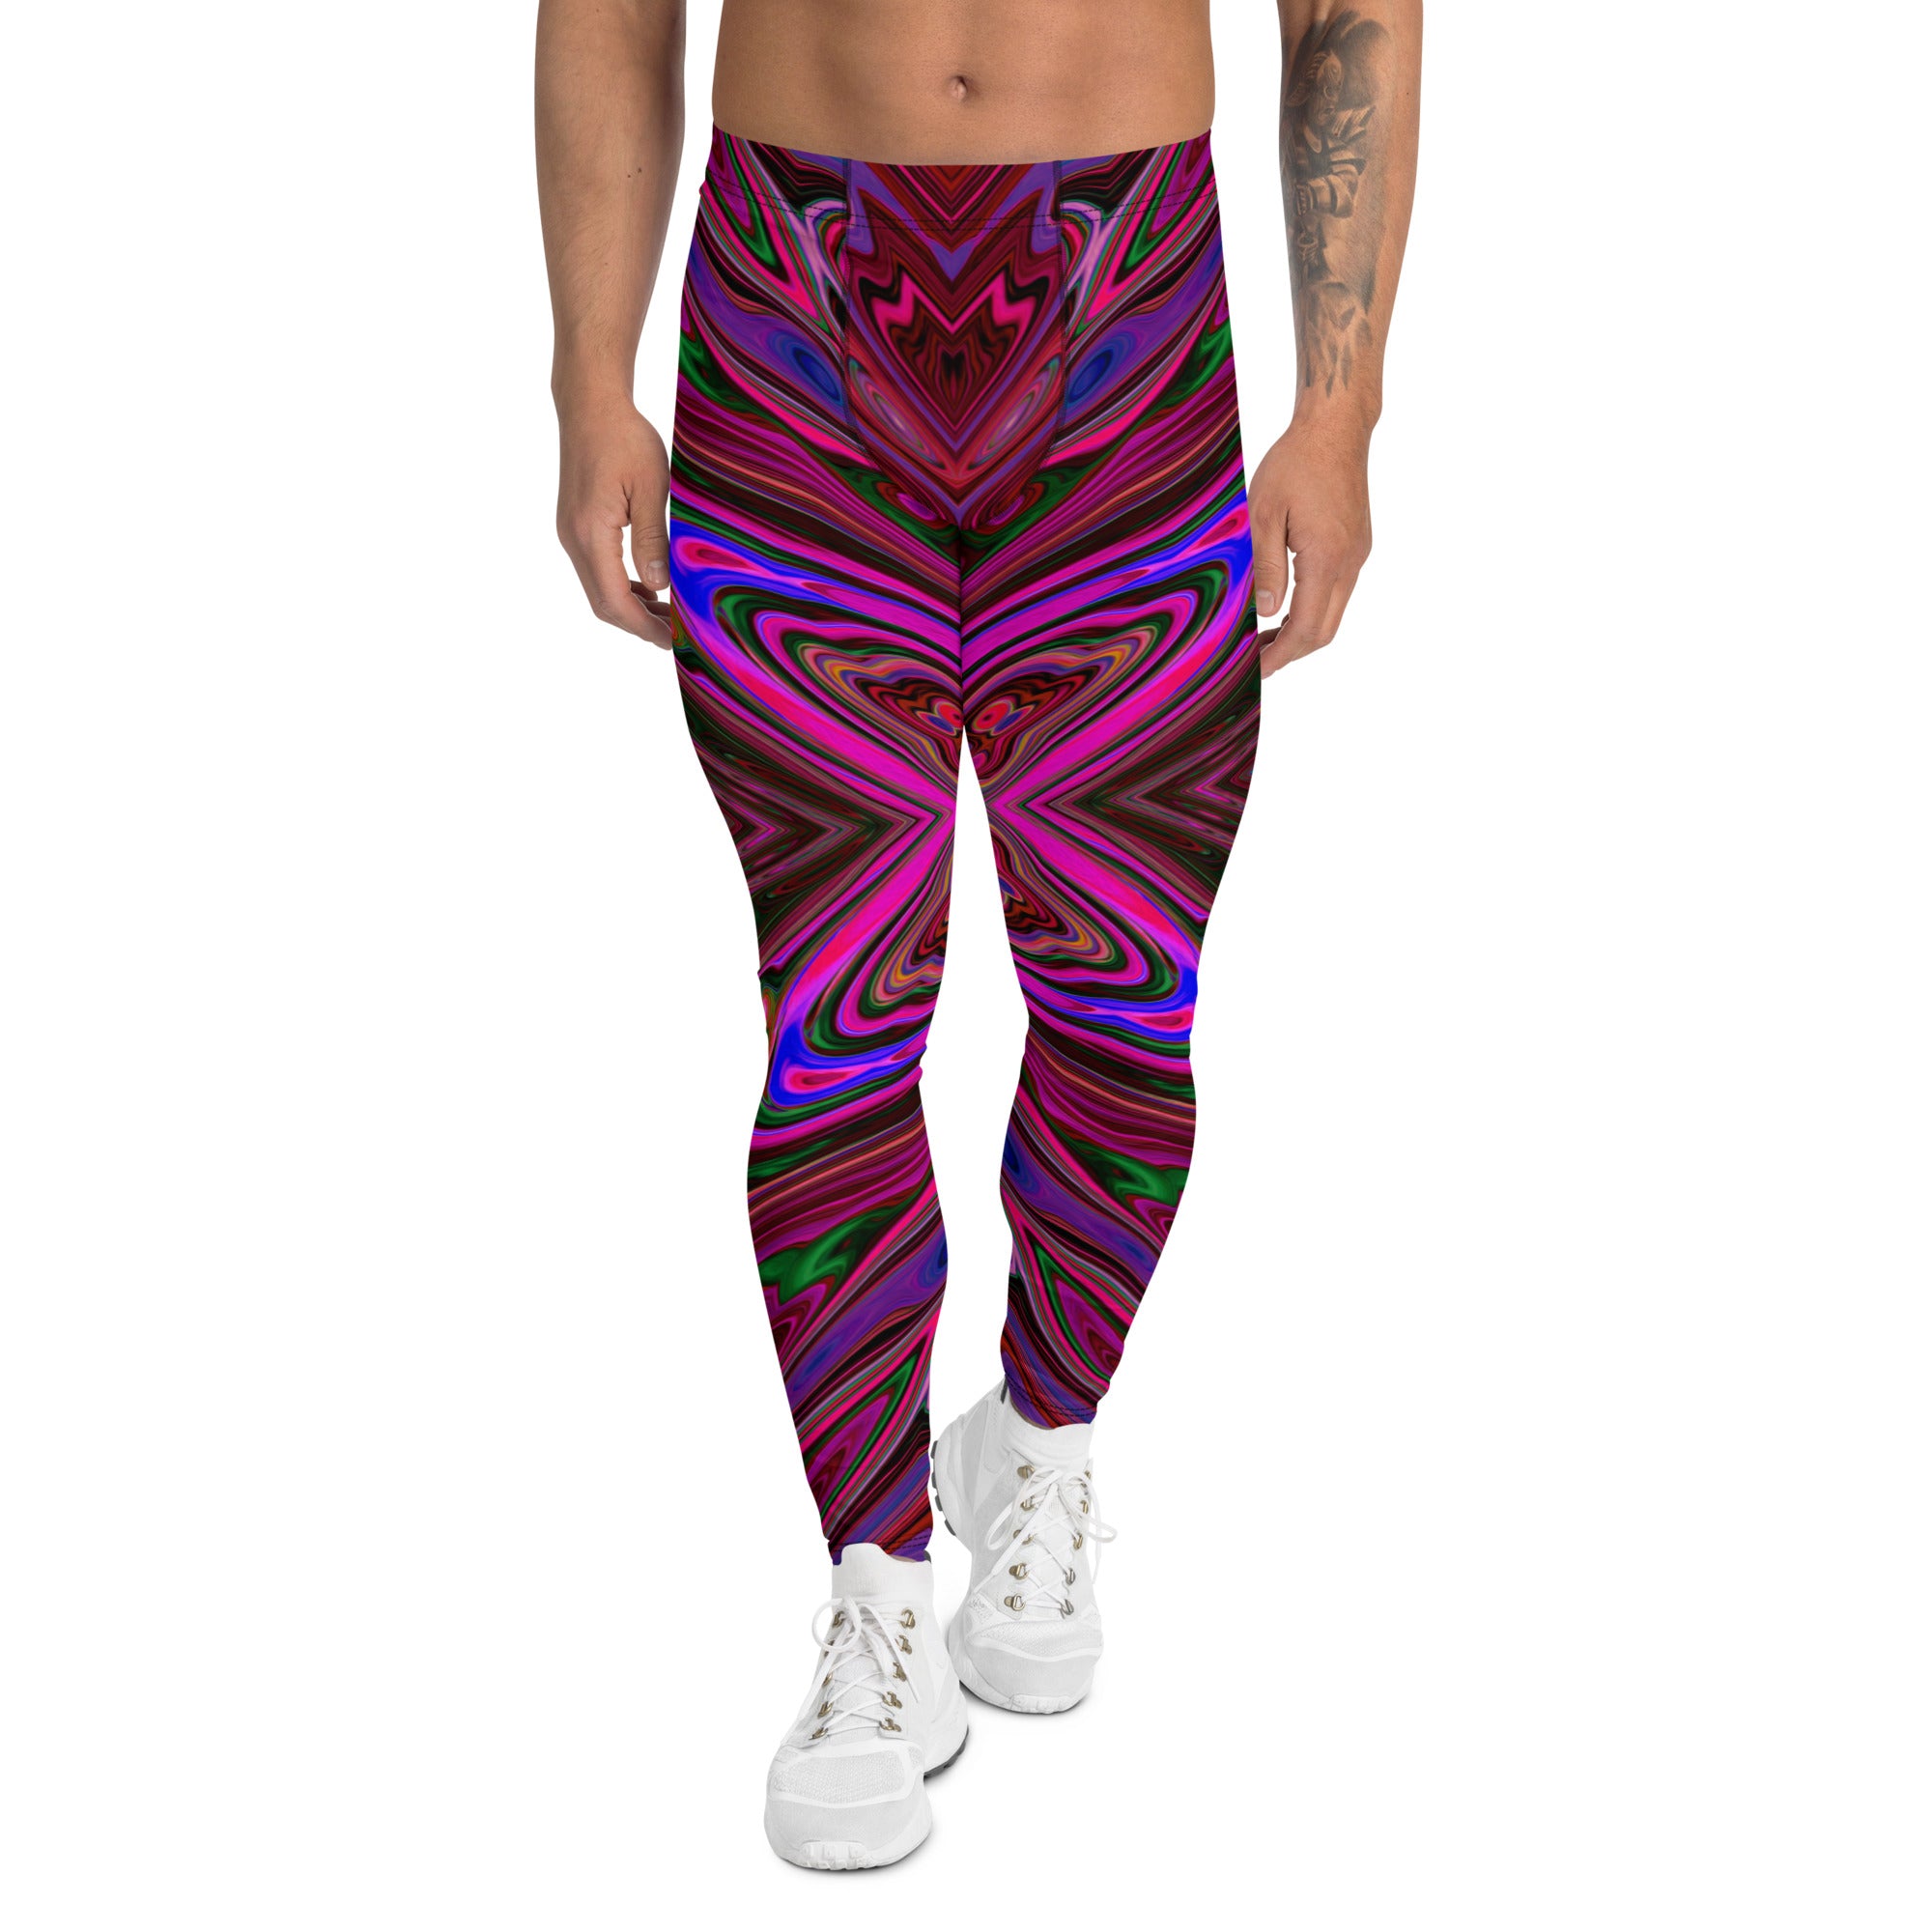 Men's Leggings, Trippy Hot Pink, Red and Blue Abstract Butterfly